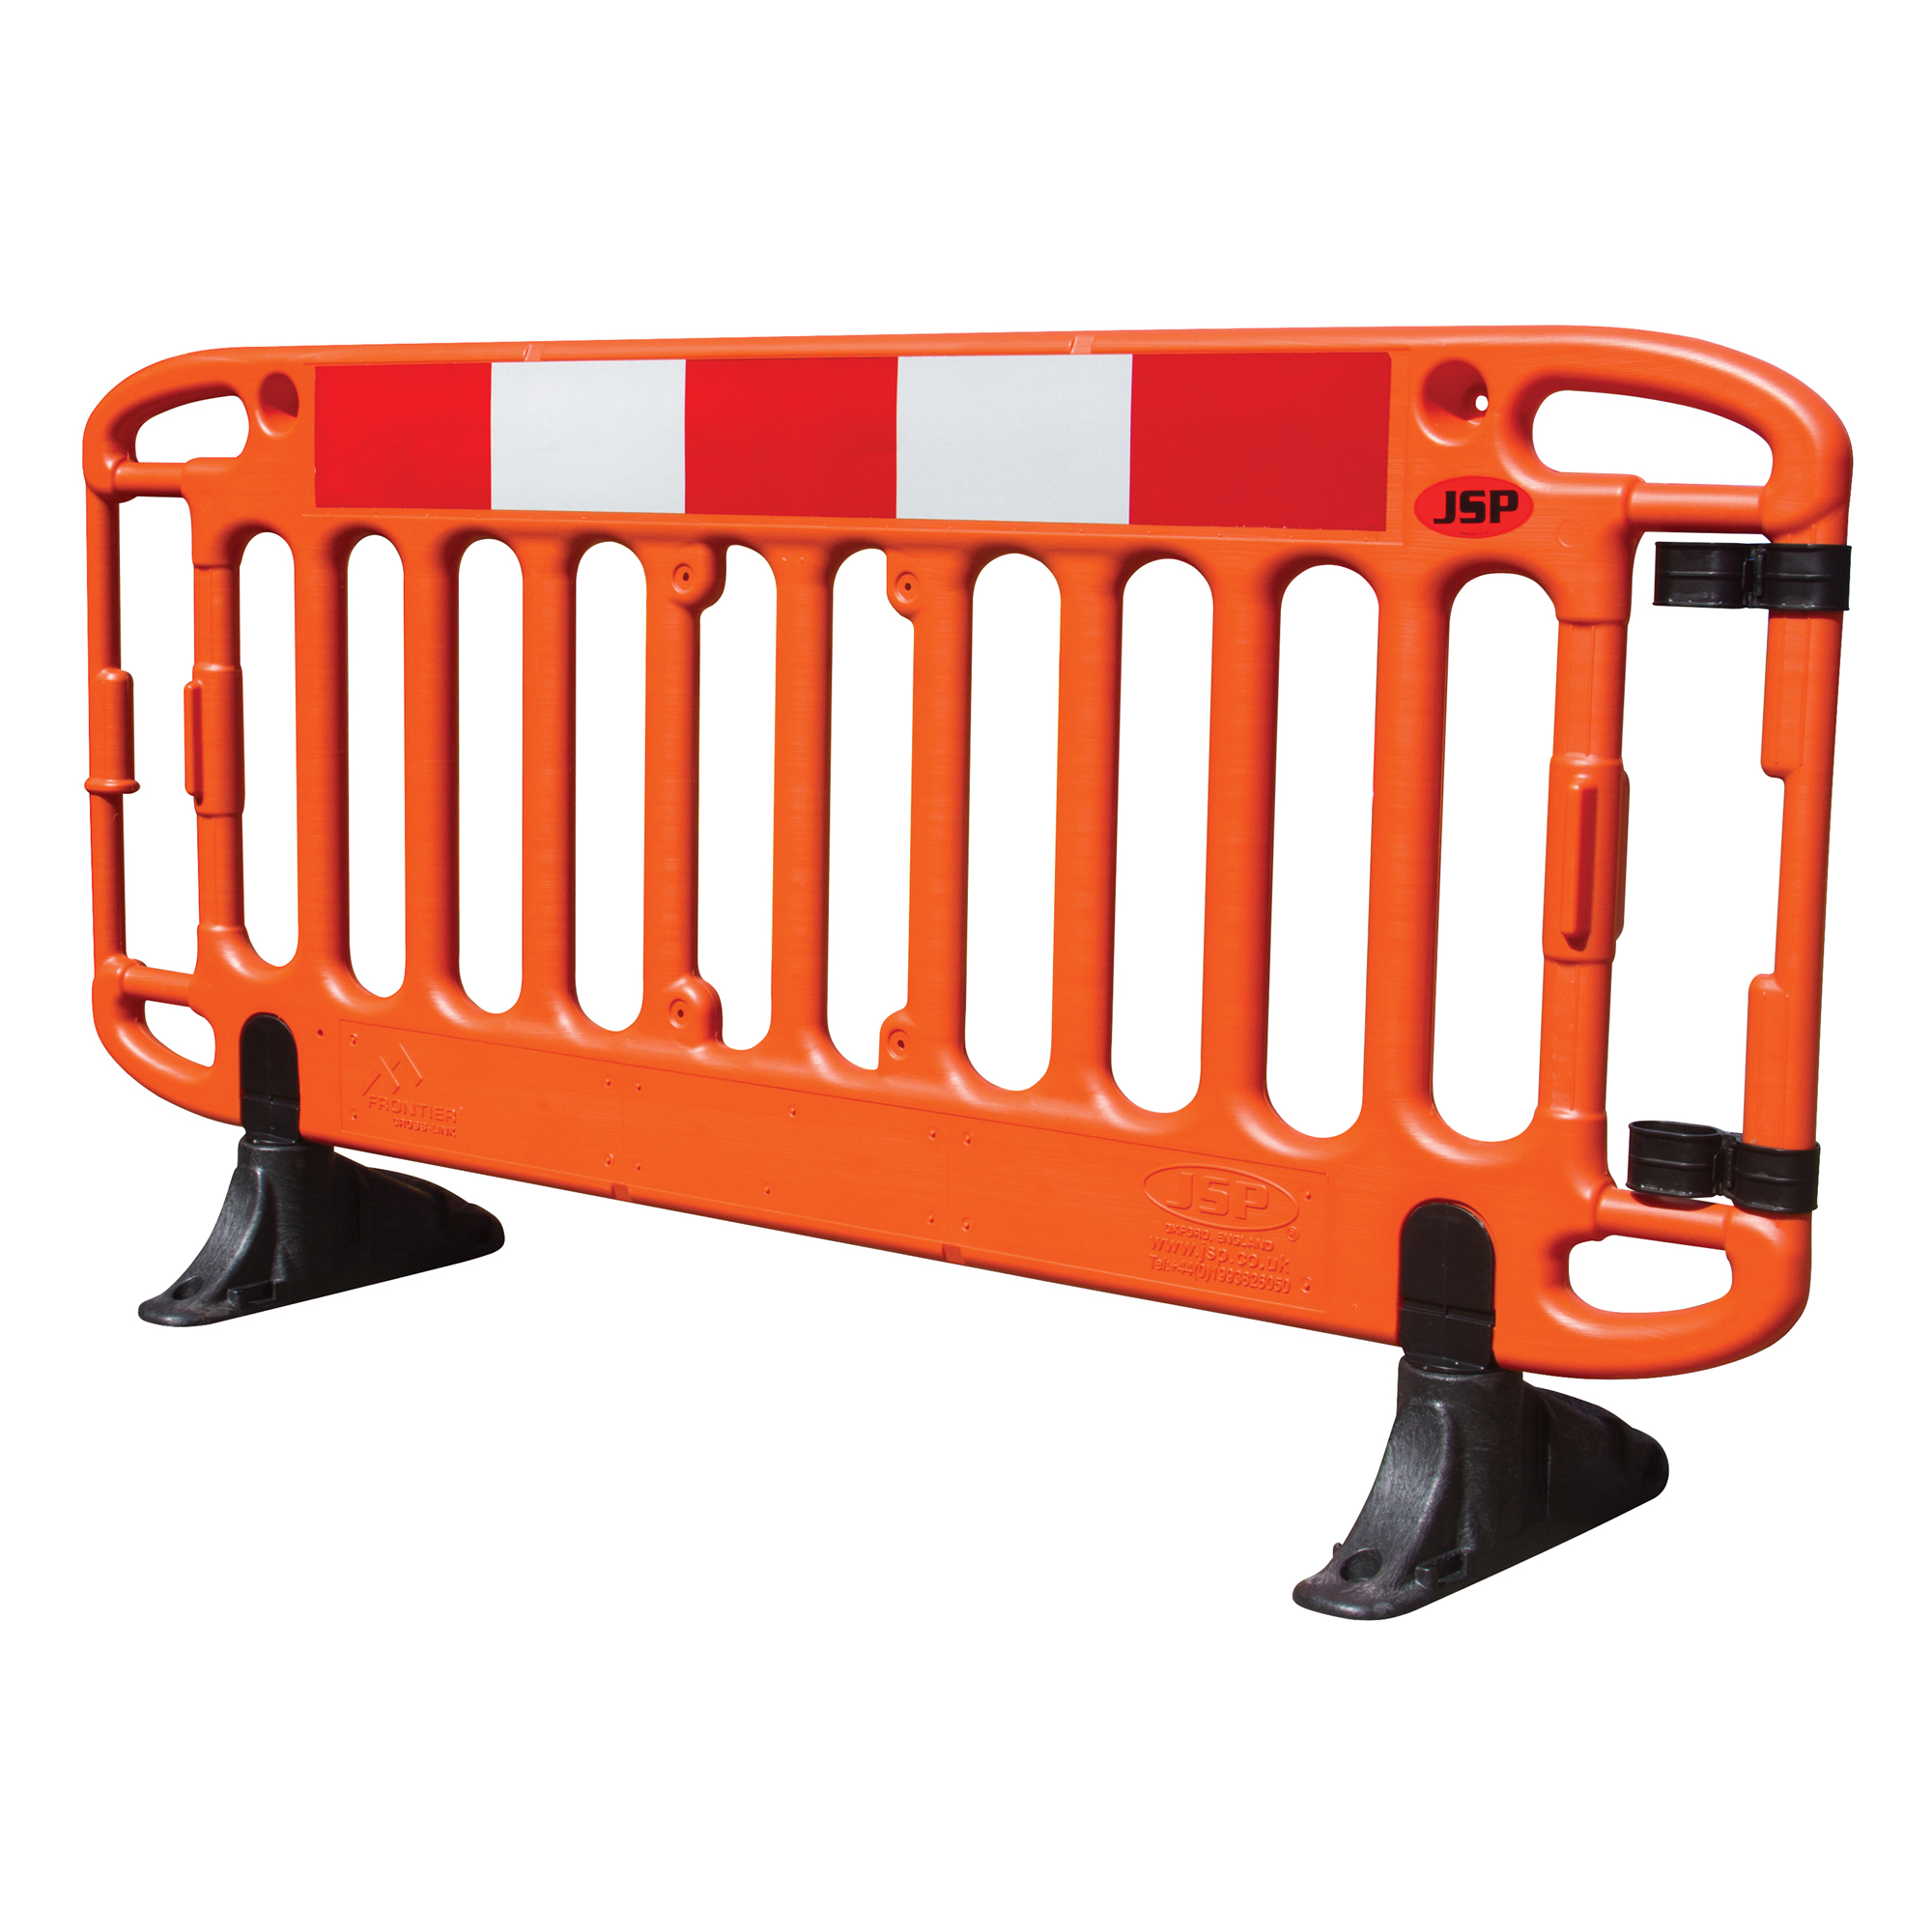 Frontier® 2m Blow Moulded Road Traffic Barrier with Black Anti